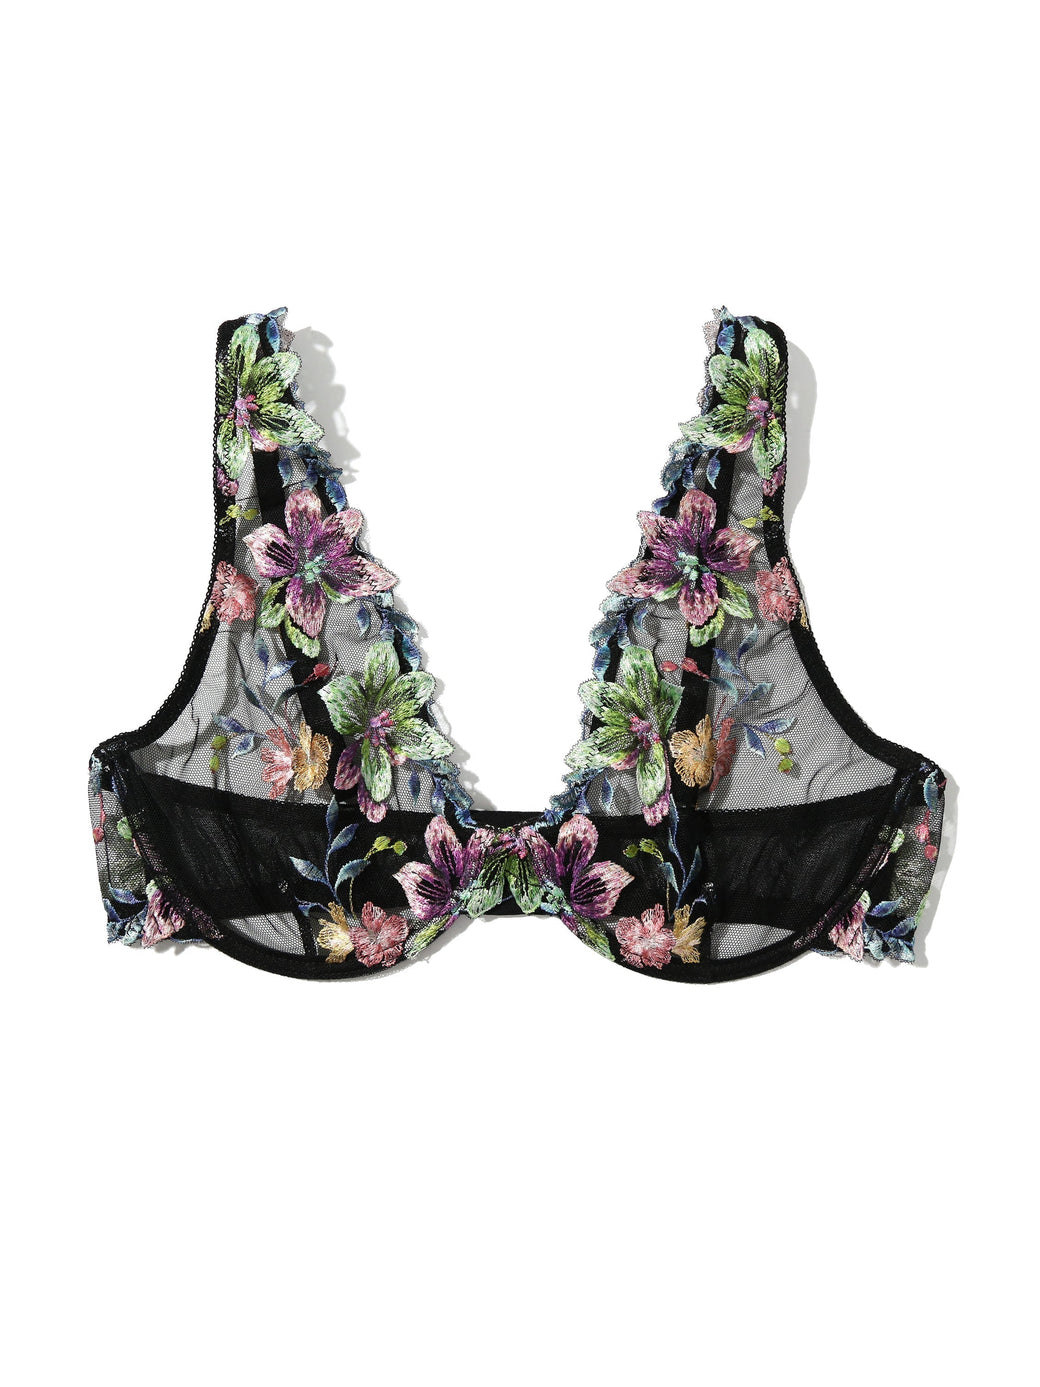 Something About You Bralette Sale